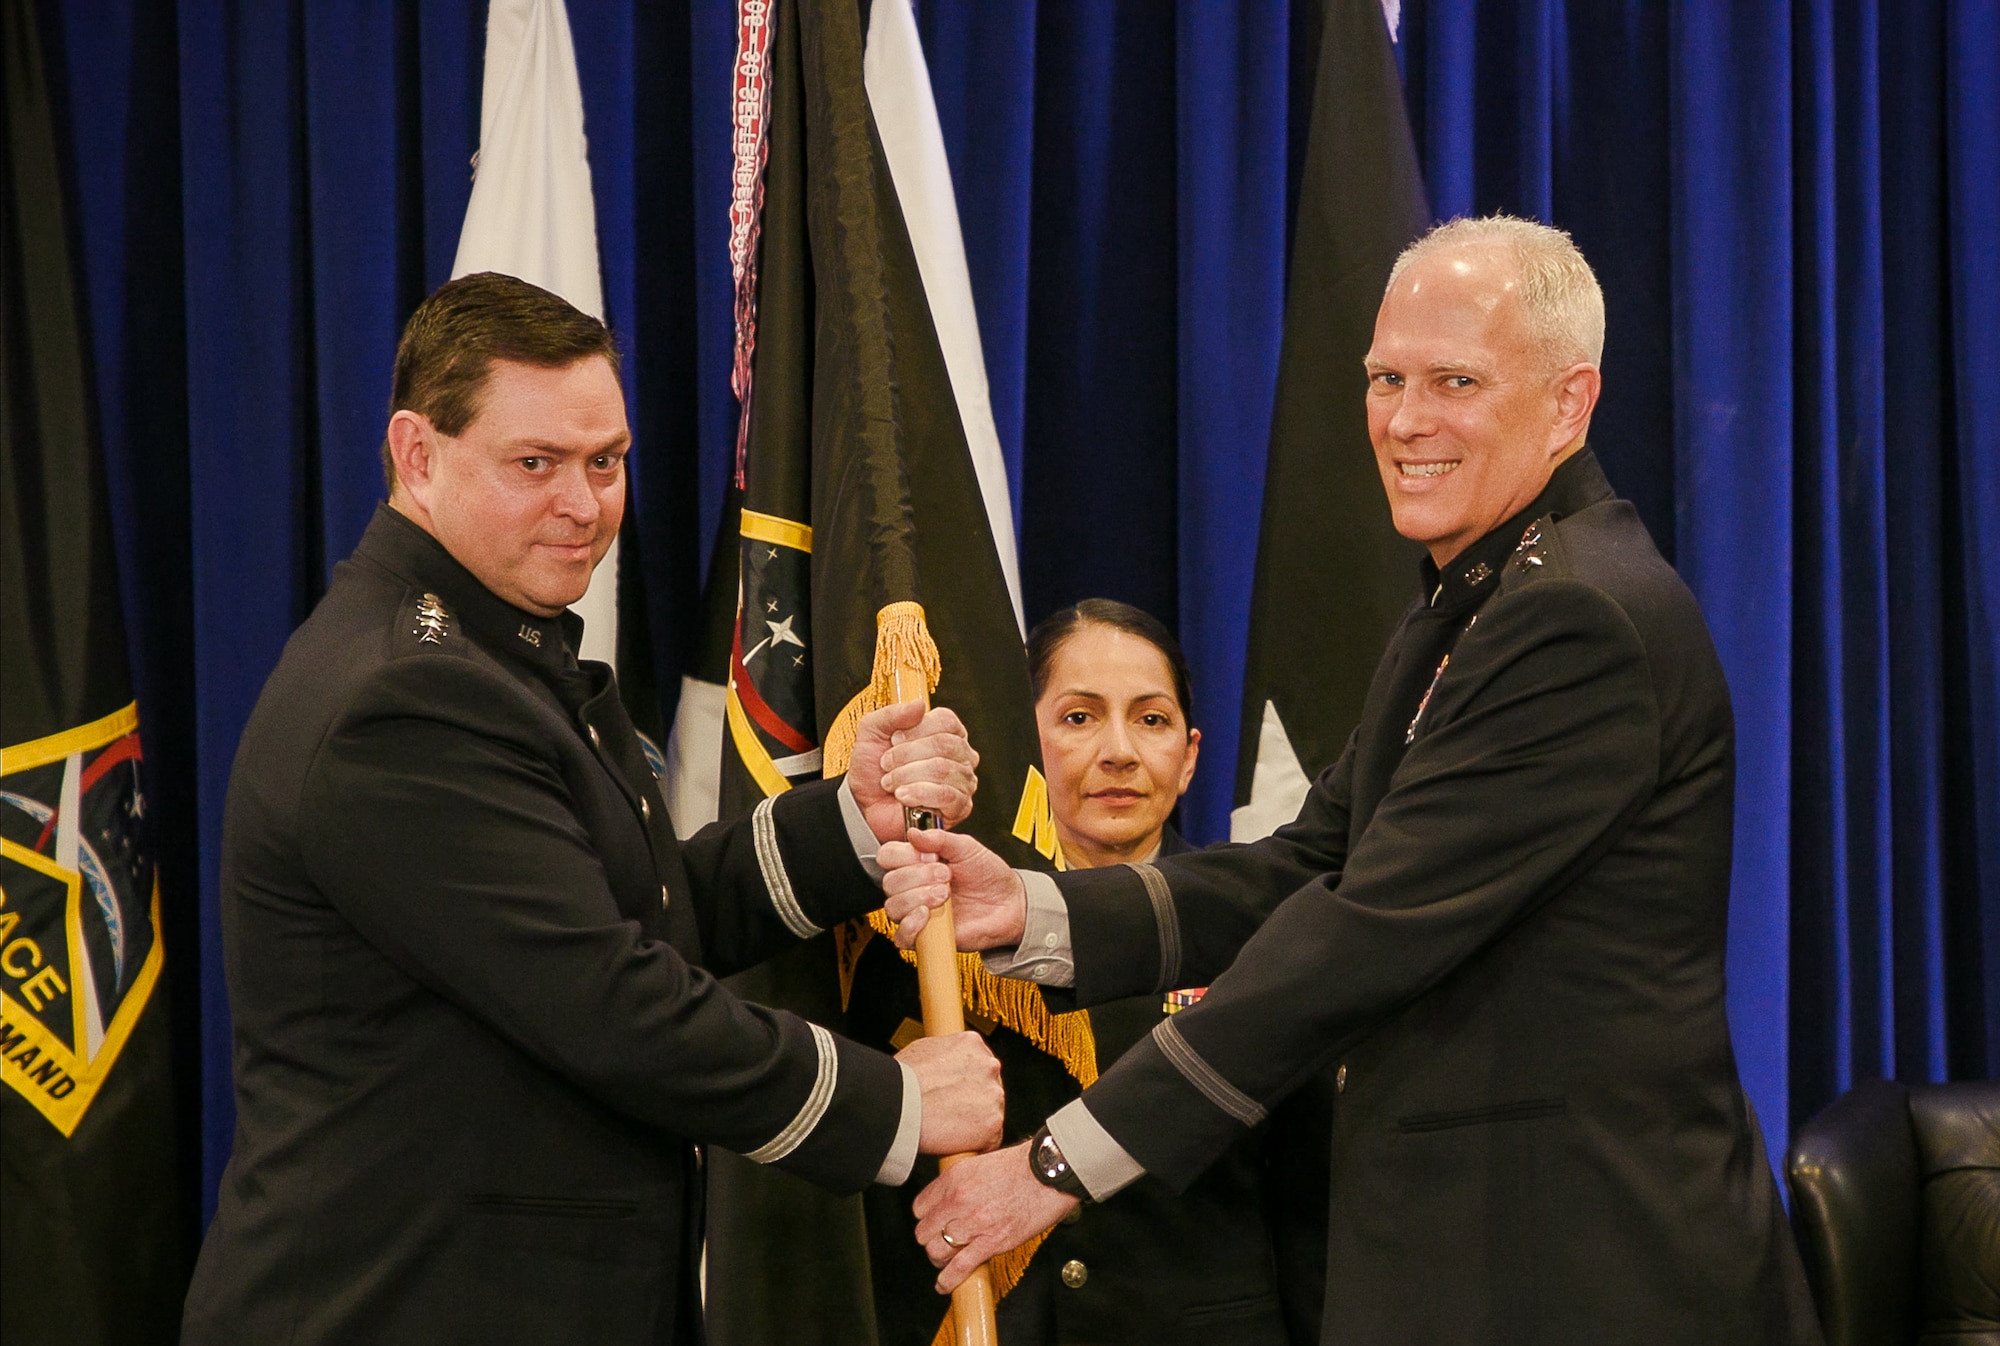 U.S. Space Force Lt. Gen. Philip Garrant, right, accepts the Space Systems Command (SSC) flag from Chief of Space Operations Gen. Chance Saltzman, left, during a change of command ceremony Feb. 1, 2024, at SSC headquarters on Los Angeles Air Force Base in El Segundo, Calif. With this change of command, Garrant became the second commander of SSC and is responsible for leading a global workforce of more than 15,000 military, civilian, and contractor personnel, as well as overseeing an annual $15.6 billion space acquisition budget, which ensures premier space capabilities are delivered timely to counter the threats in today's and tomorrow's contested space domain.